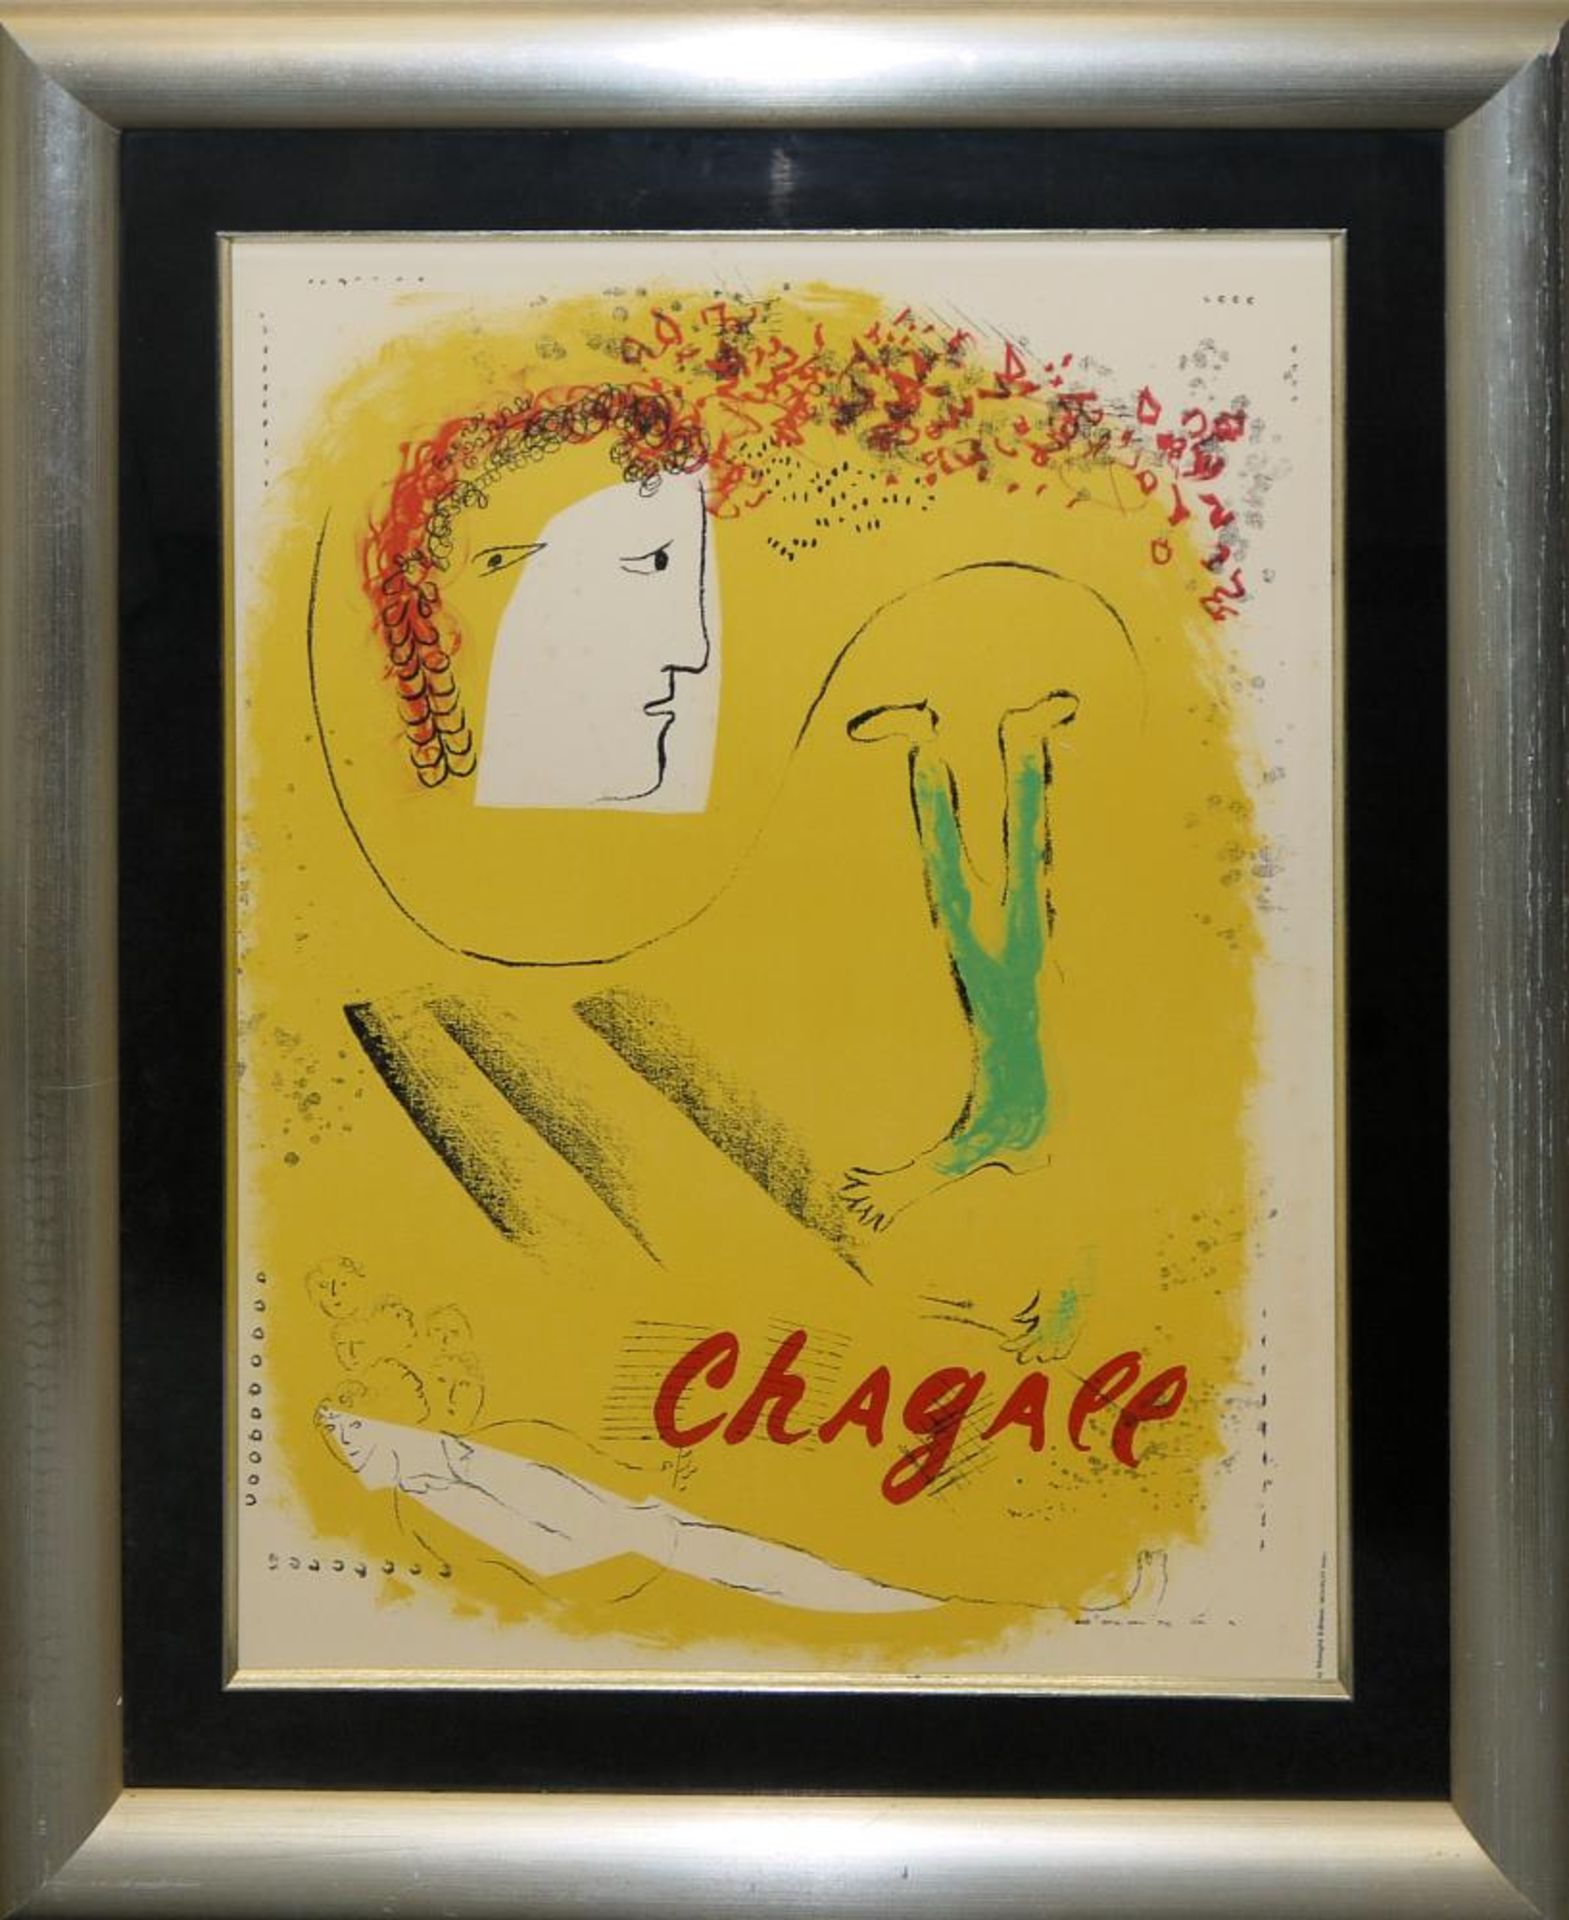 Marc Chagall, Affiche d’Exposition, Farblithographie, gerahmt Marc Chagall, 1887 – 1985,